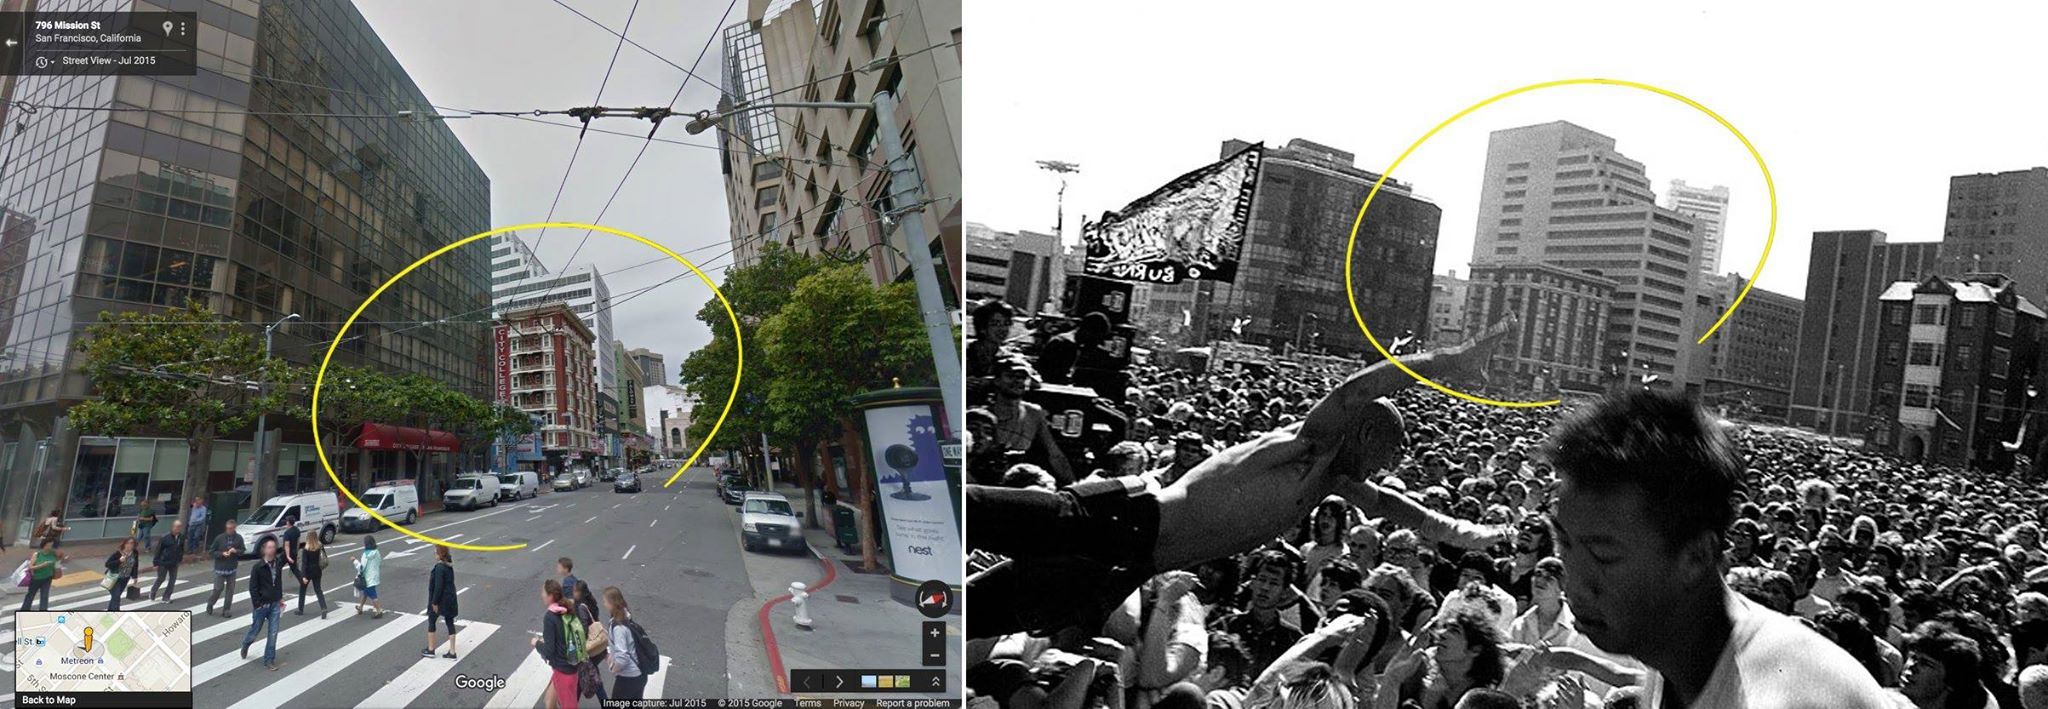 two photos of SOMA side by side, one from recent Google Streetview and the other from the 1980s showing a crowded outdoor concert with a guy crowdsurfing. In each photo, the same historic building has been circled in the background